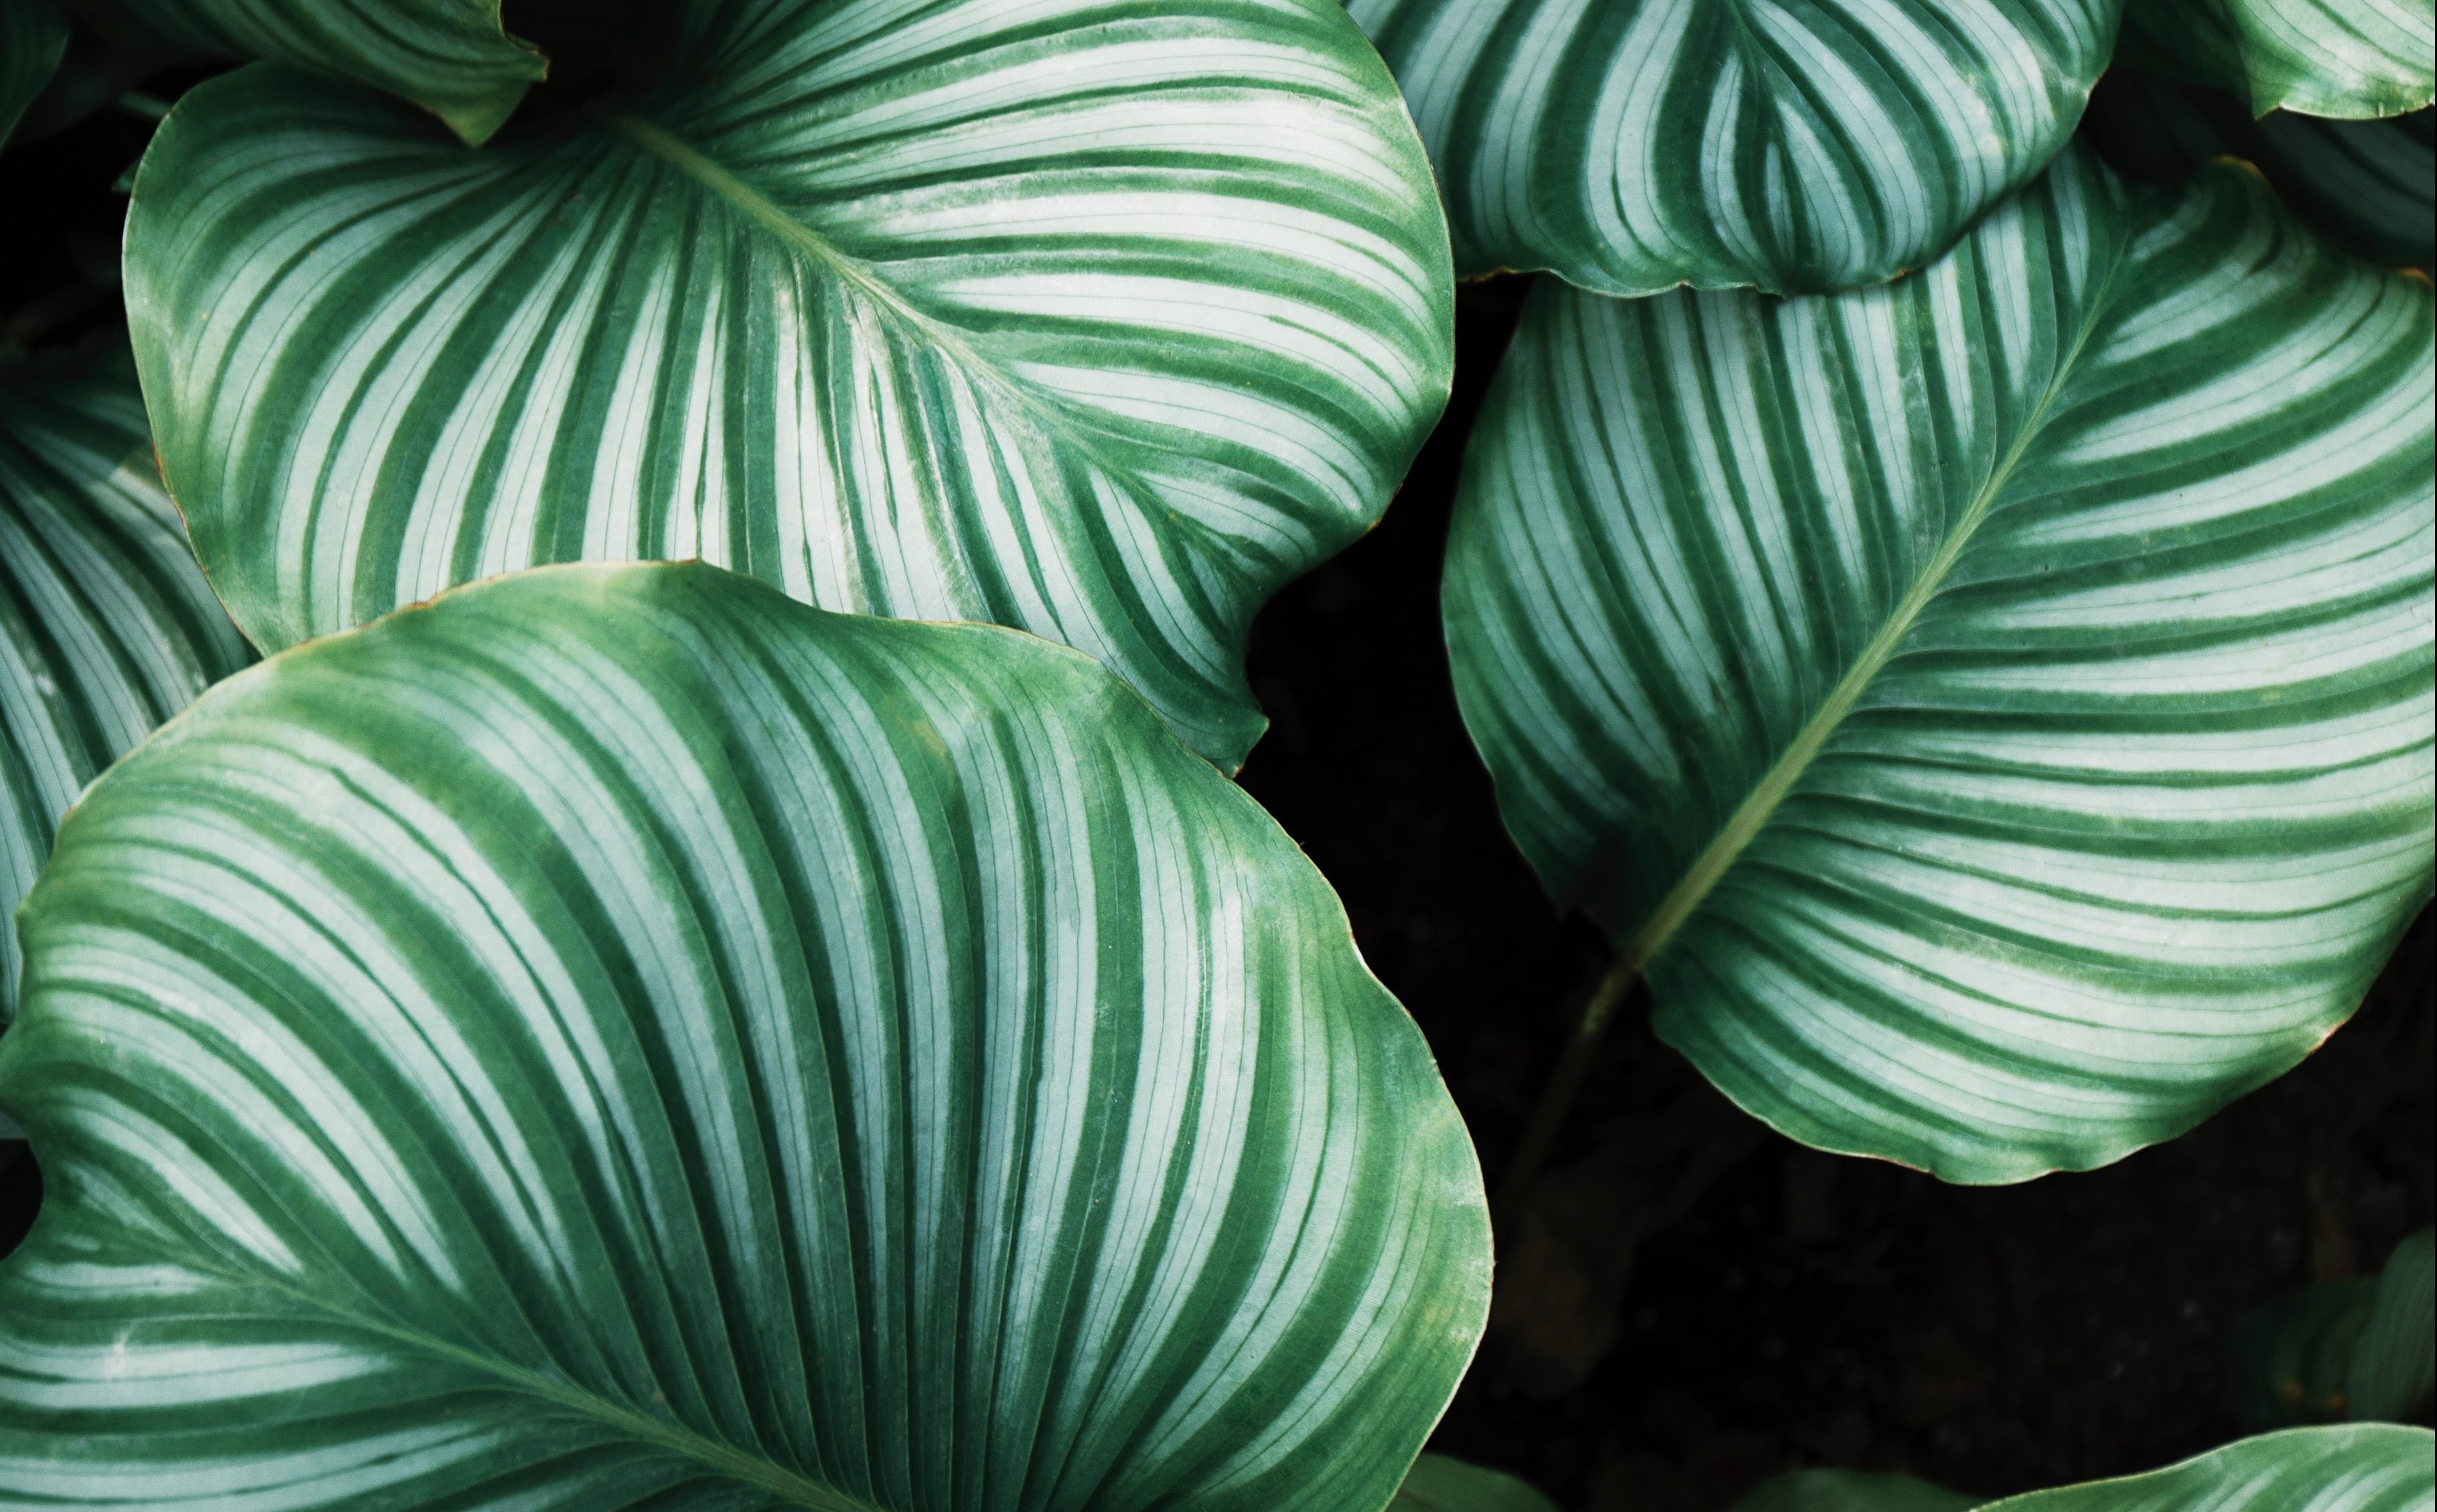 Image shows a photo of a leafy plant